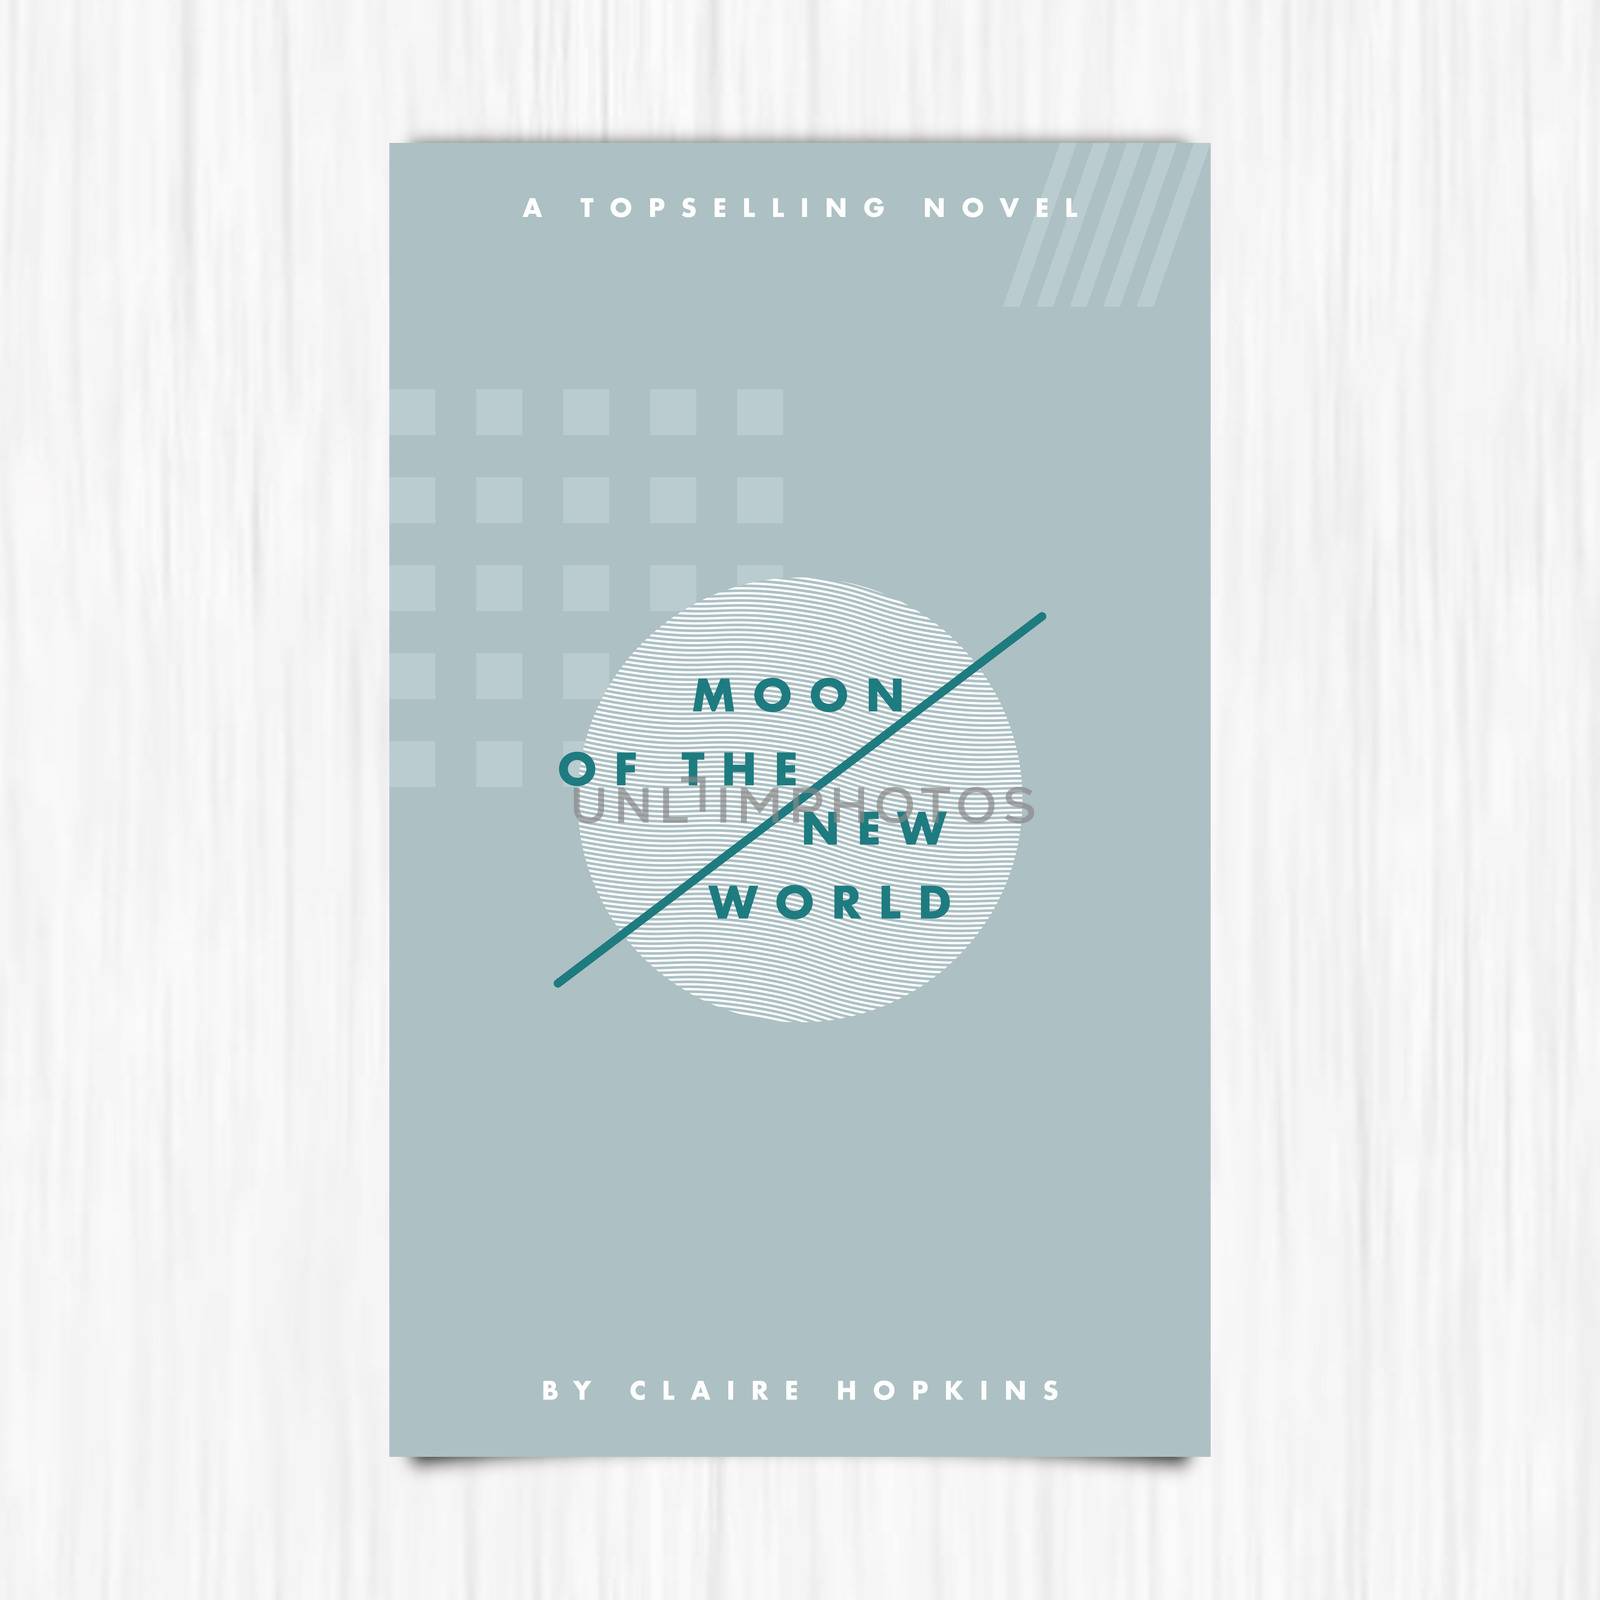 Vector of novel cover with moon of the new world by Wavebreakmedia